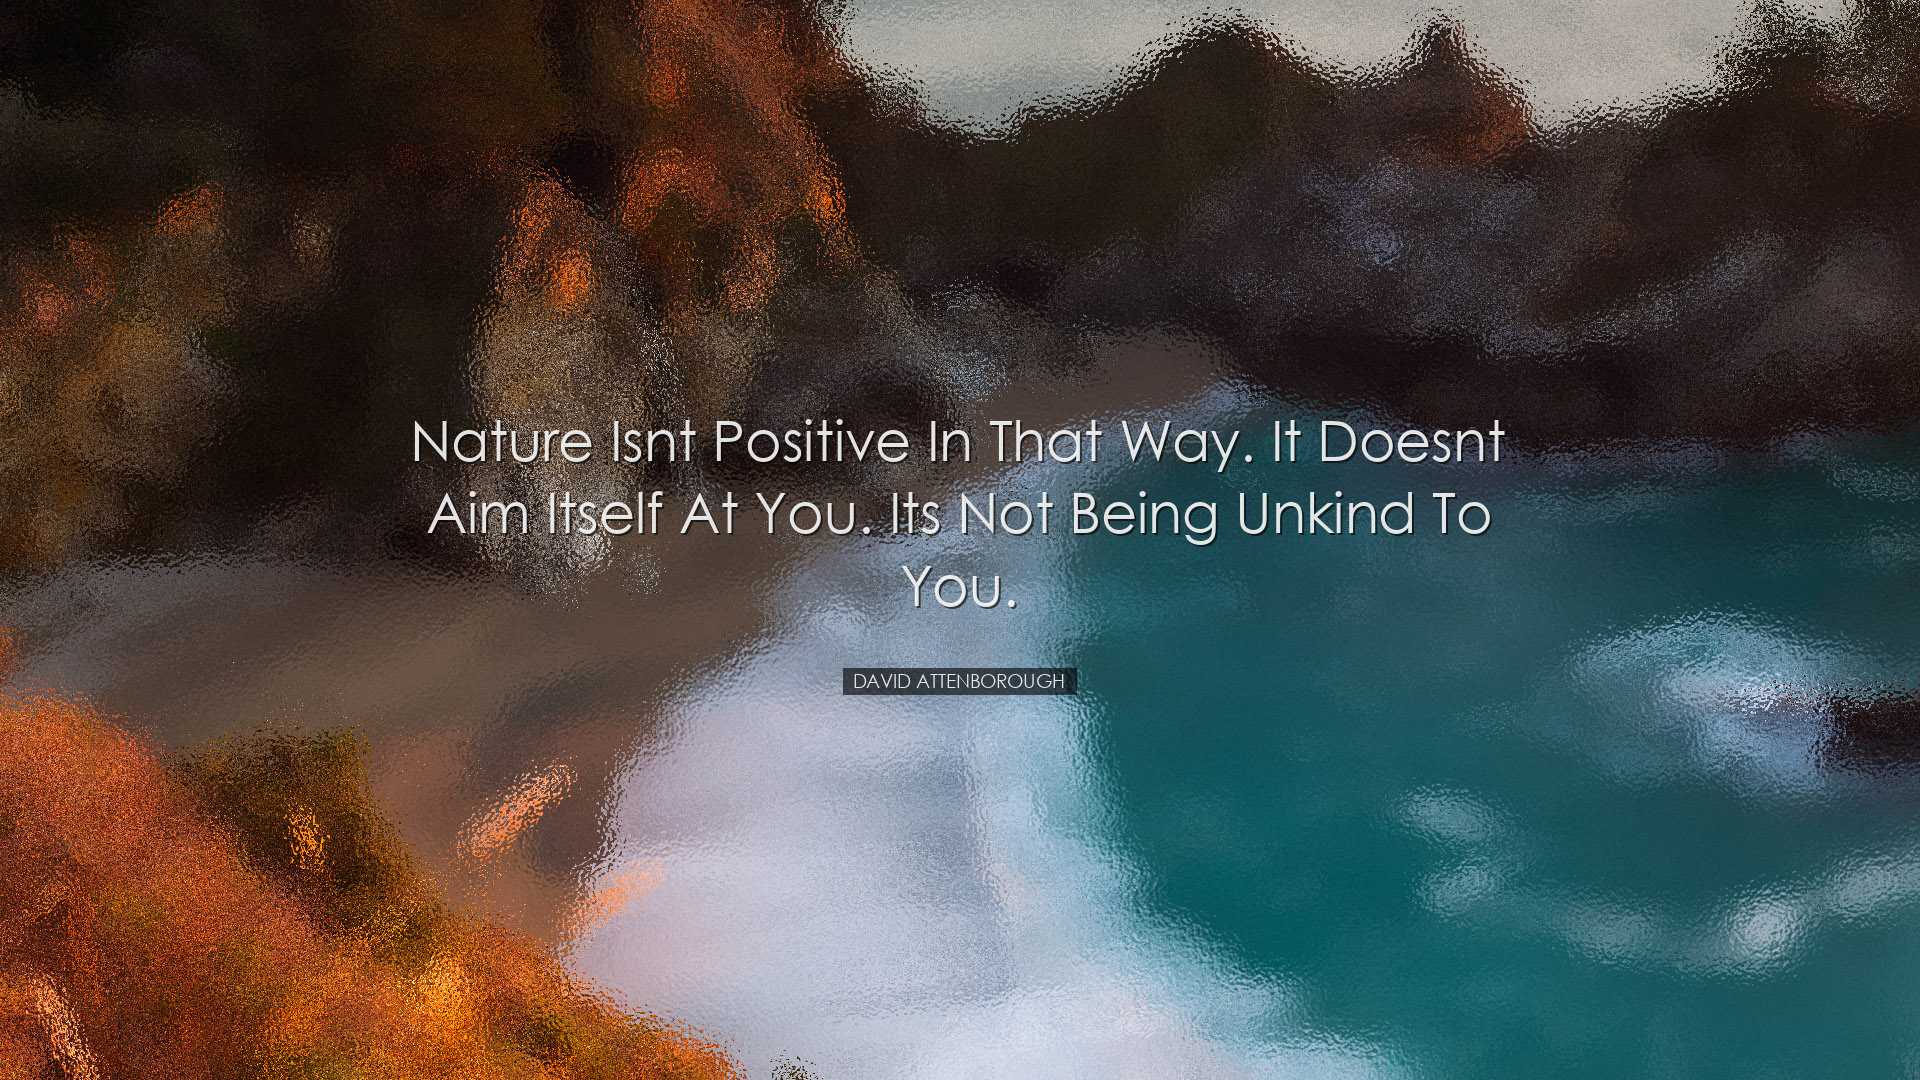 Nature isnt positive in that way. It doesnt aim itself at you. Its